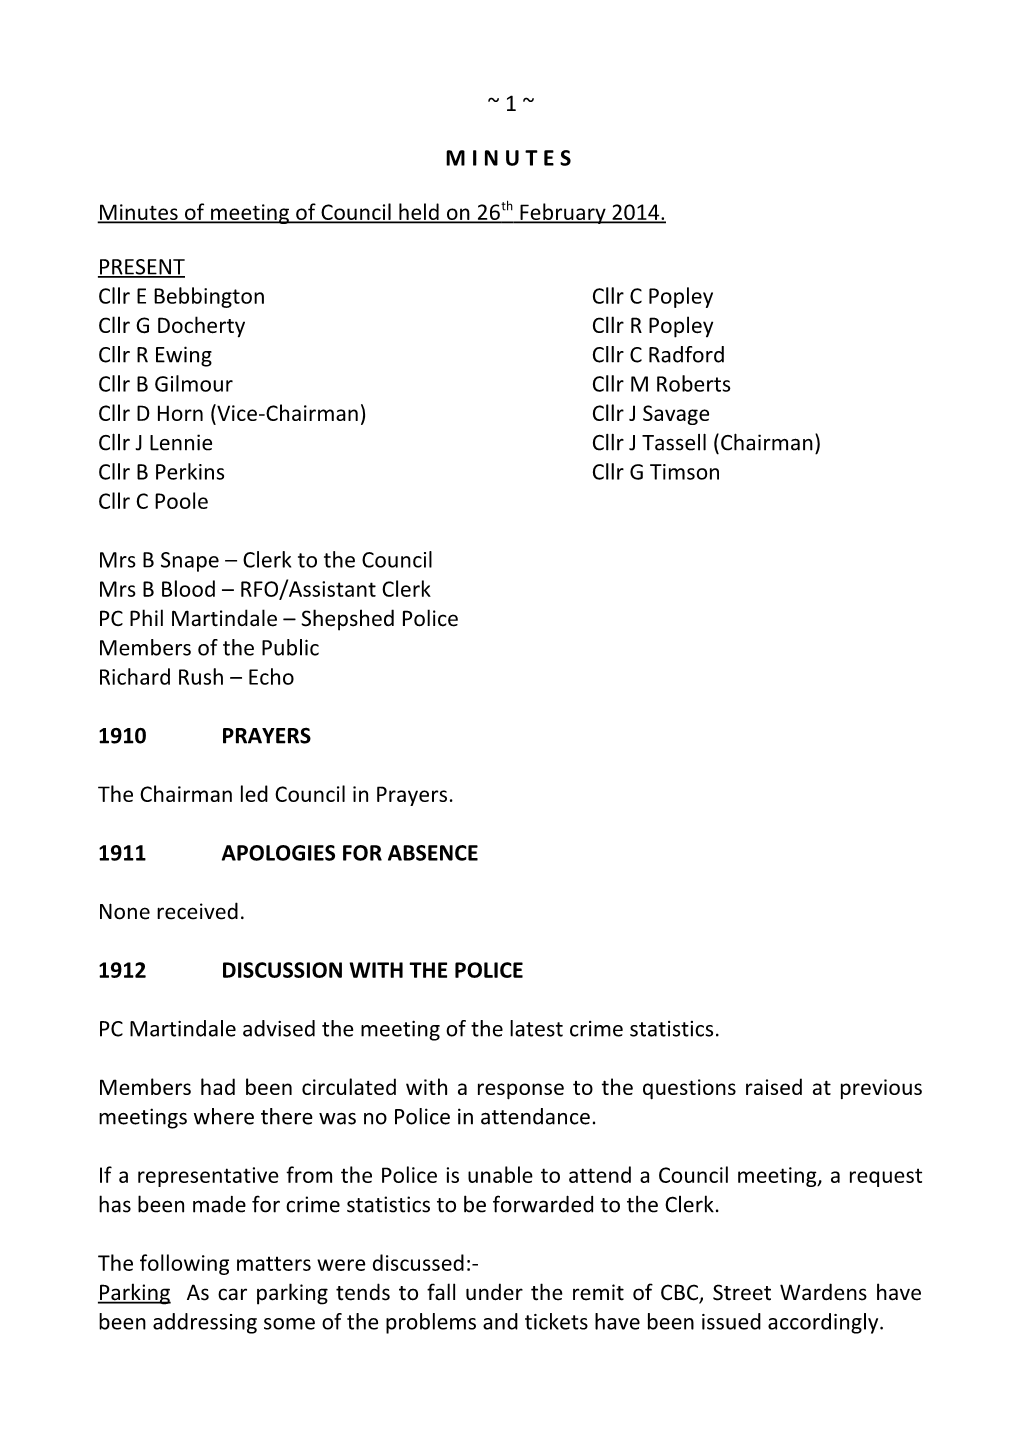 Minutes of Meeting of Council Held on 26Th February 2014